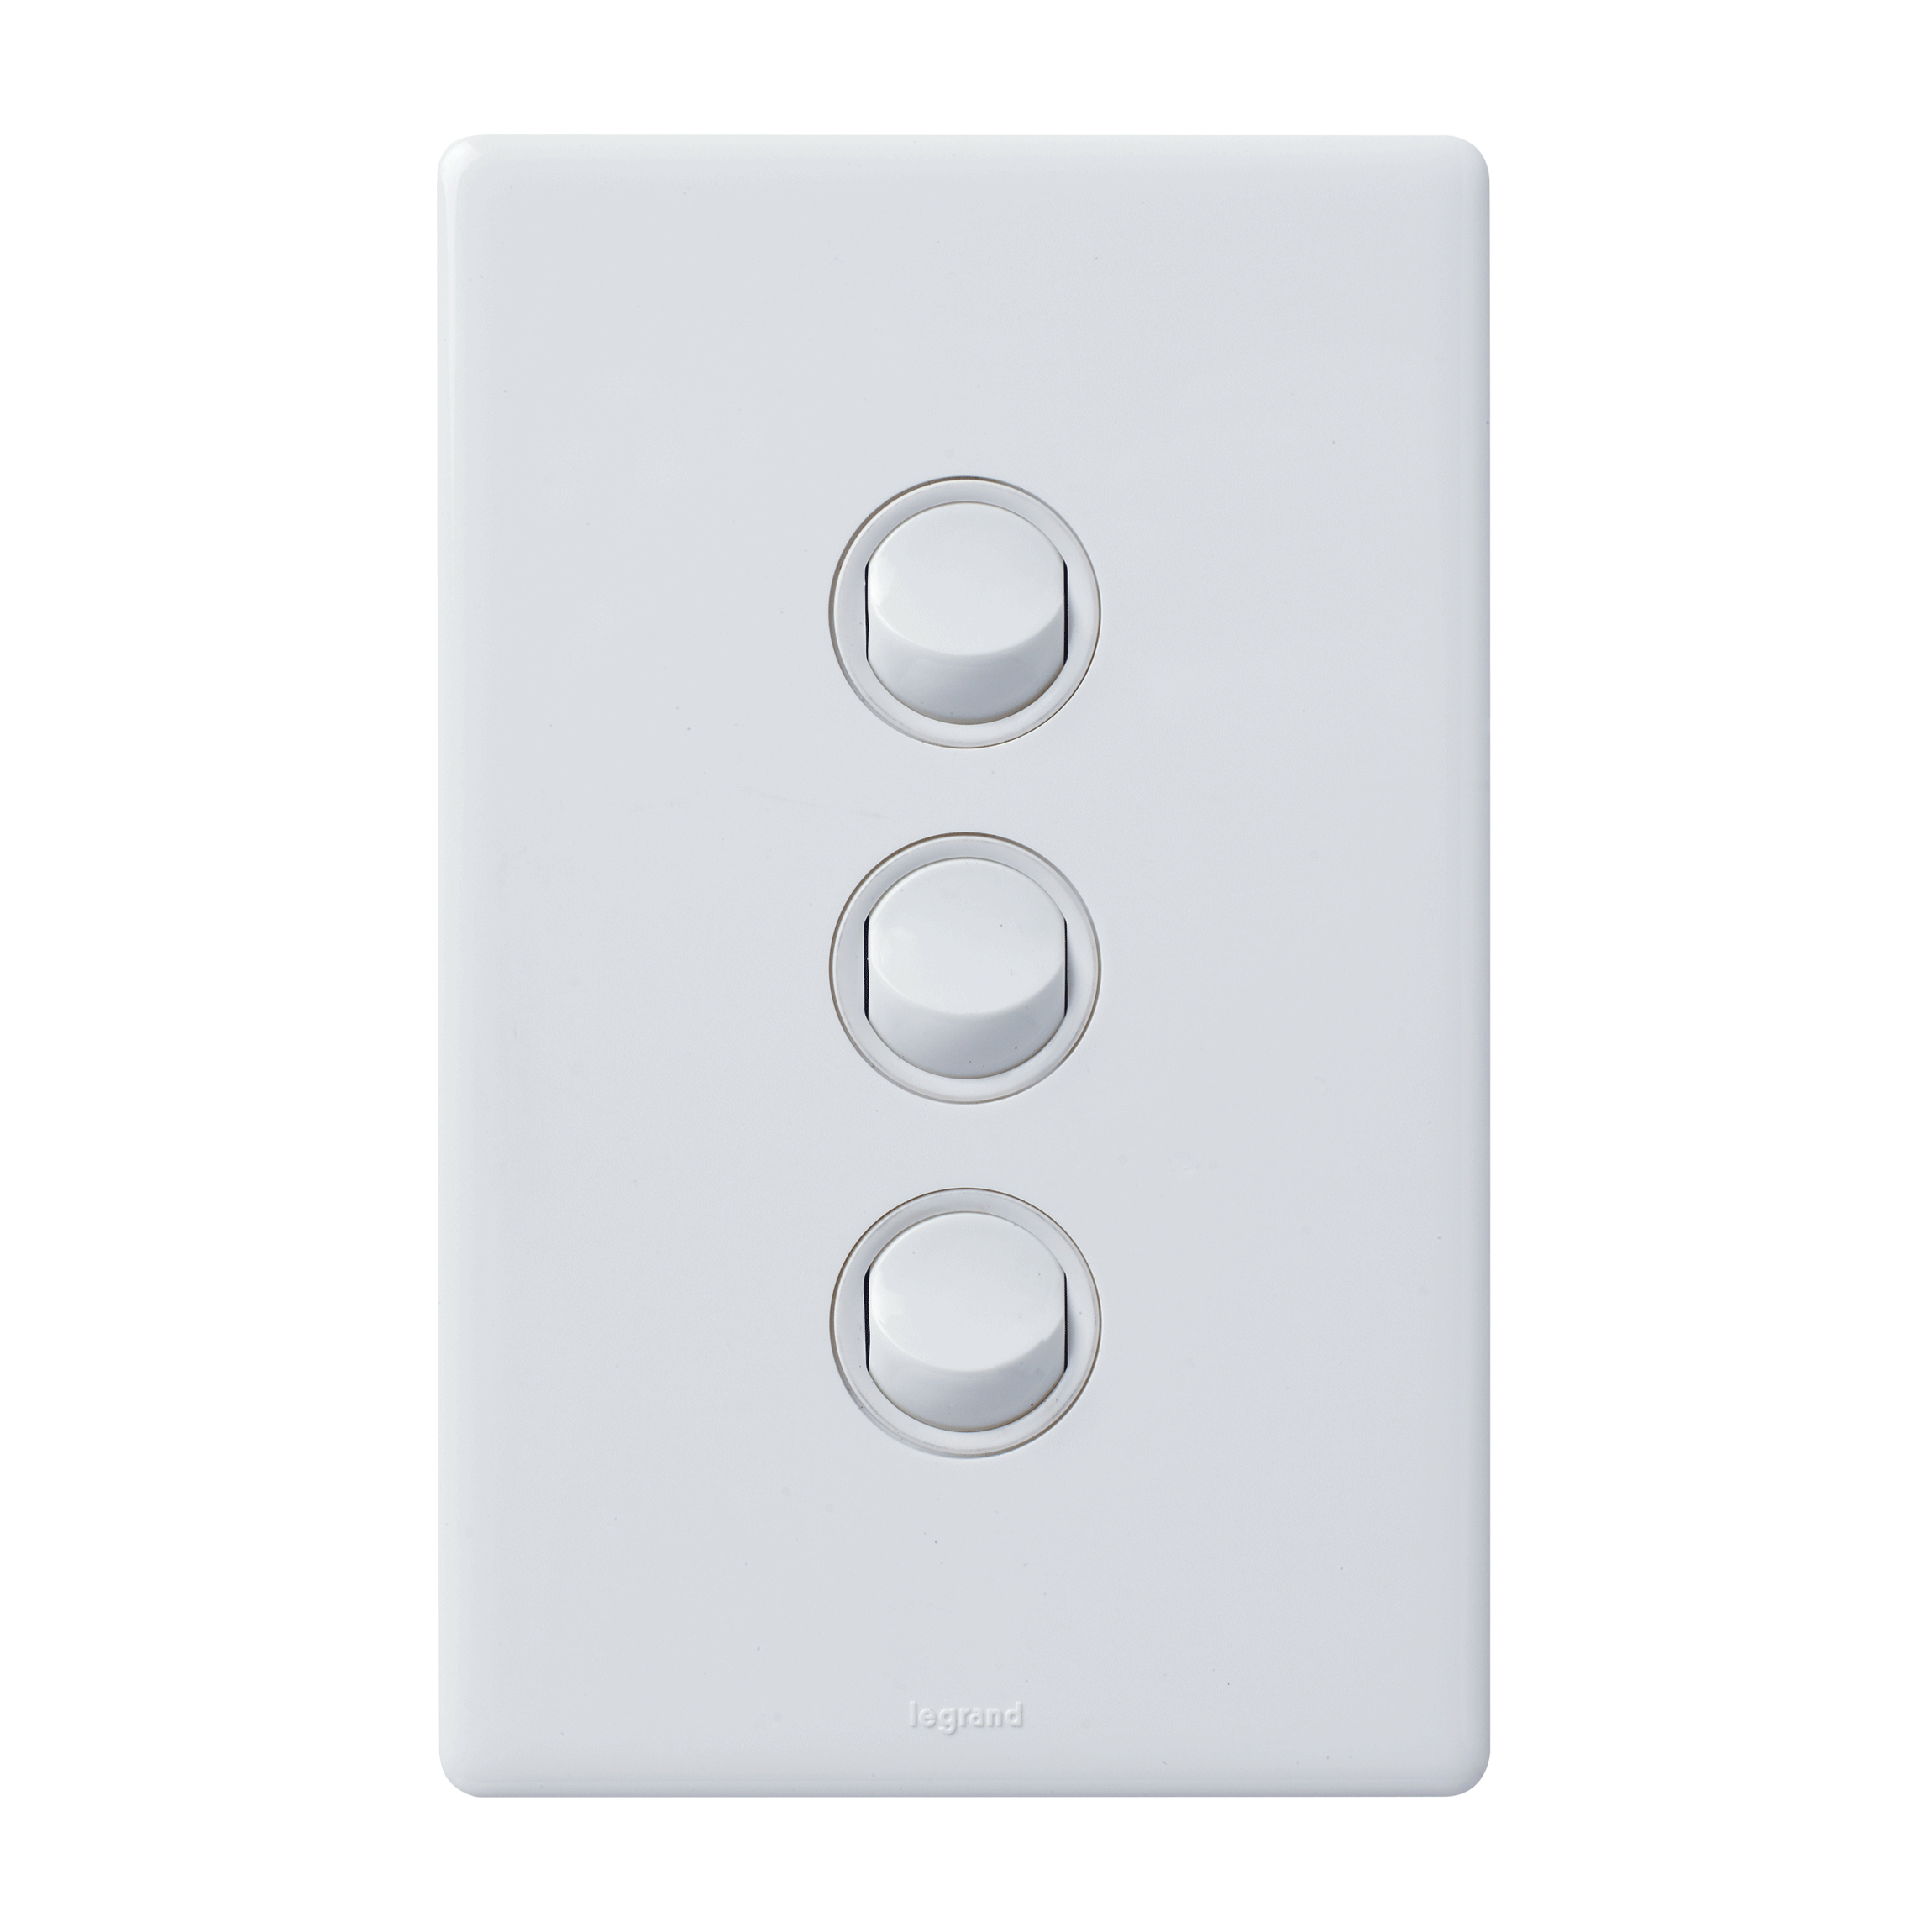 16A 3-GANG SWITCH WHITE, EXCEL LIFE